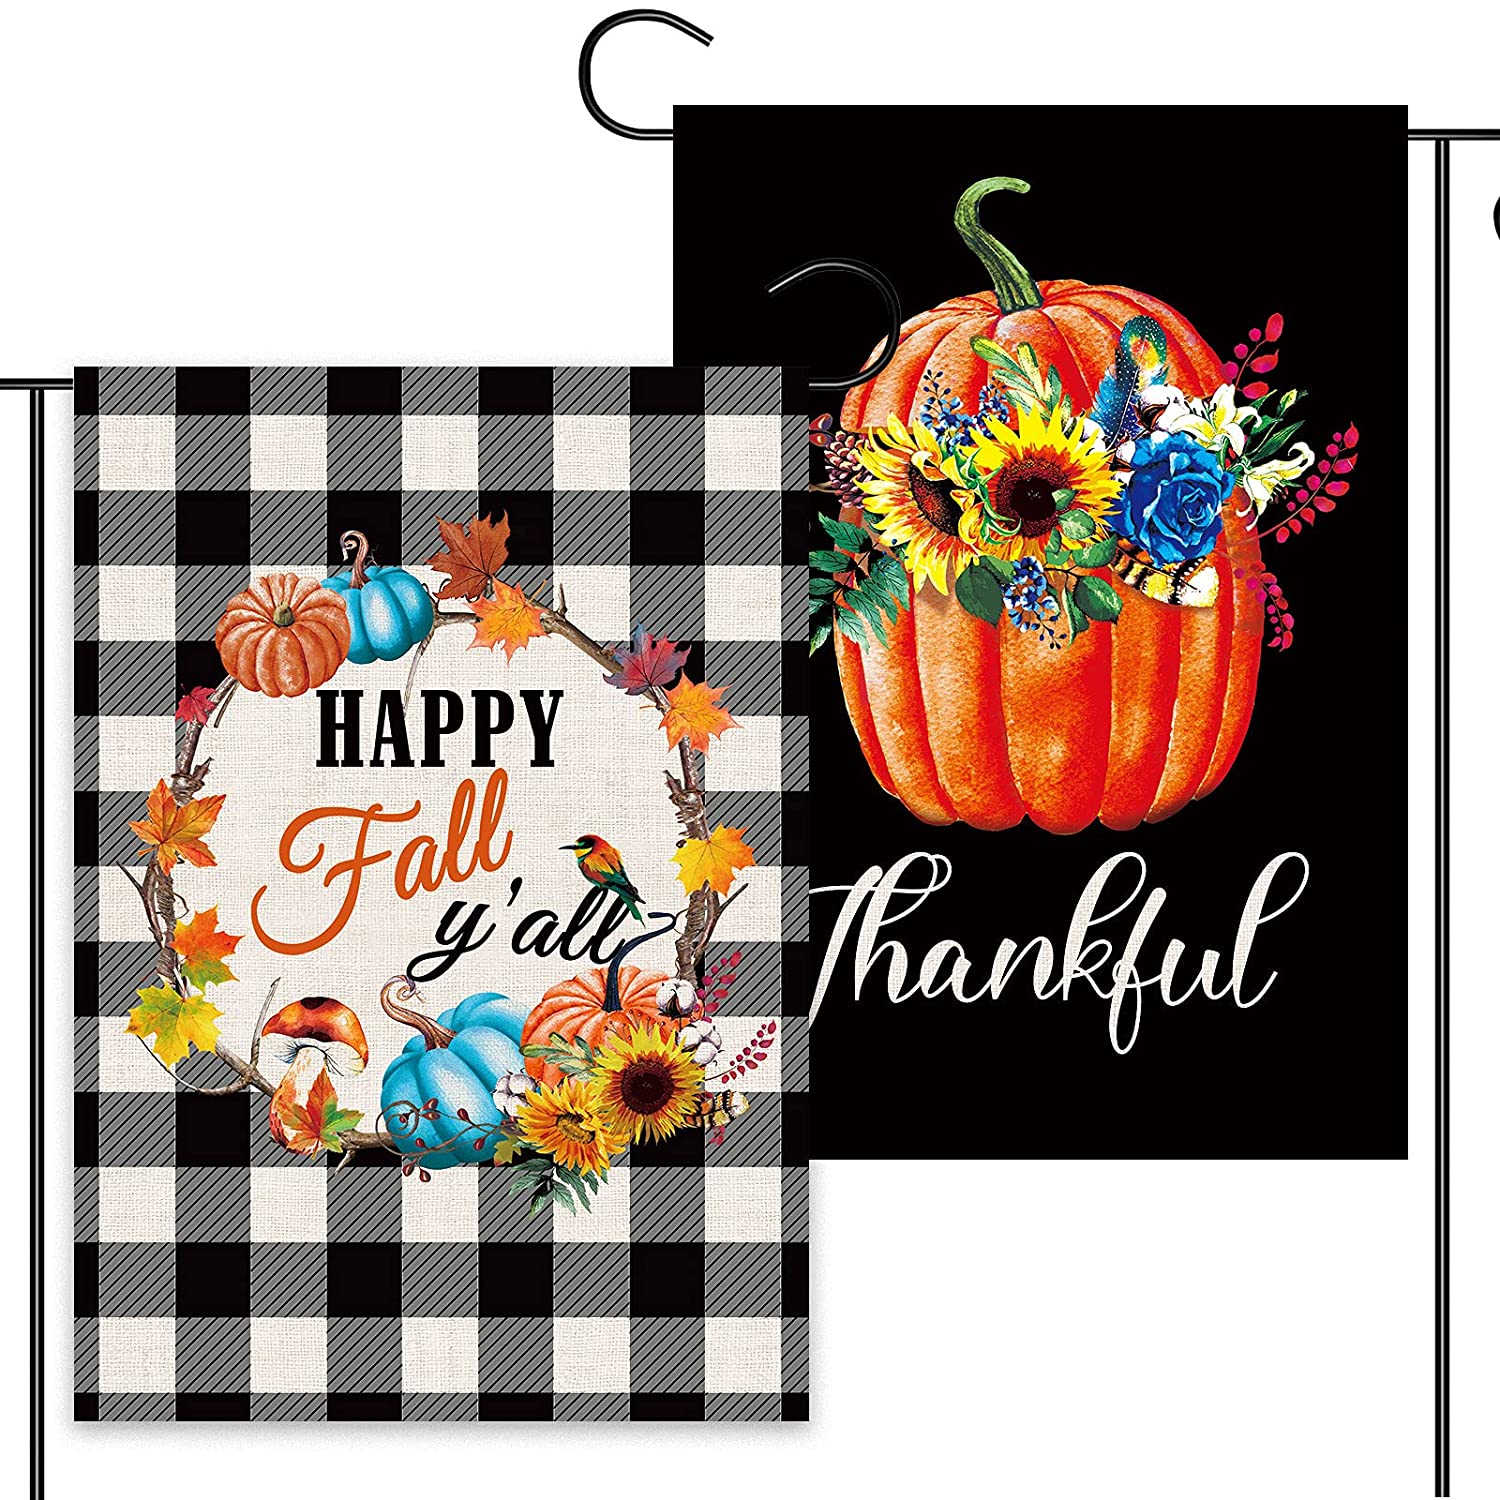 2 Pcs Welcome Fall Garden Flags 12x18 Double Sided, Burlap Harvest Pumpkin And Buffalo Plaid Happy Fall Y'all Wreath Thanksgiving Garden Flags, Outdoor Yard Decors for Pumpkin Patch Farmhouse